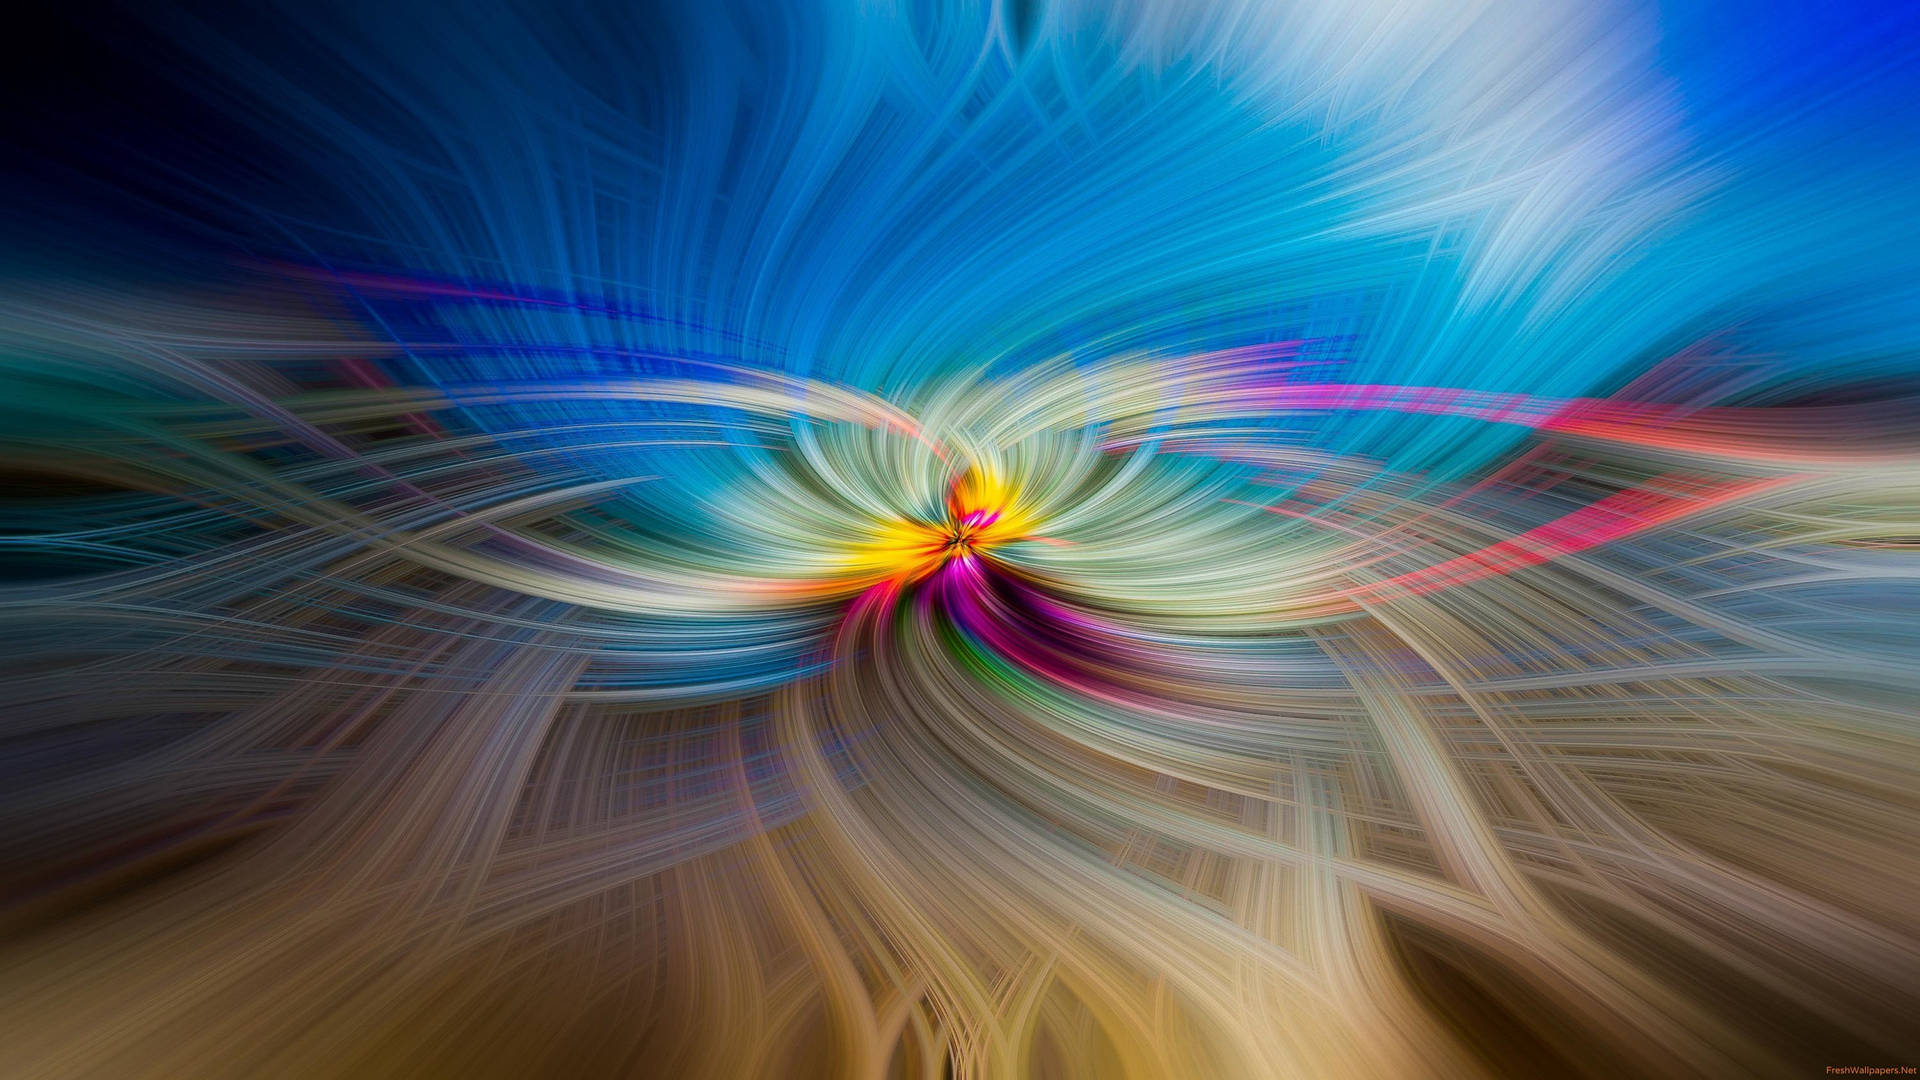 4k Moving Abstract Flower Design